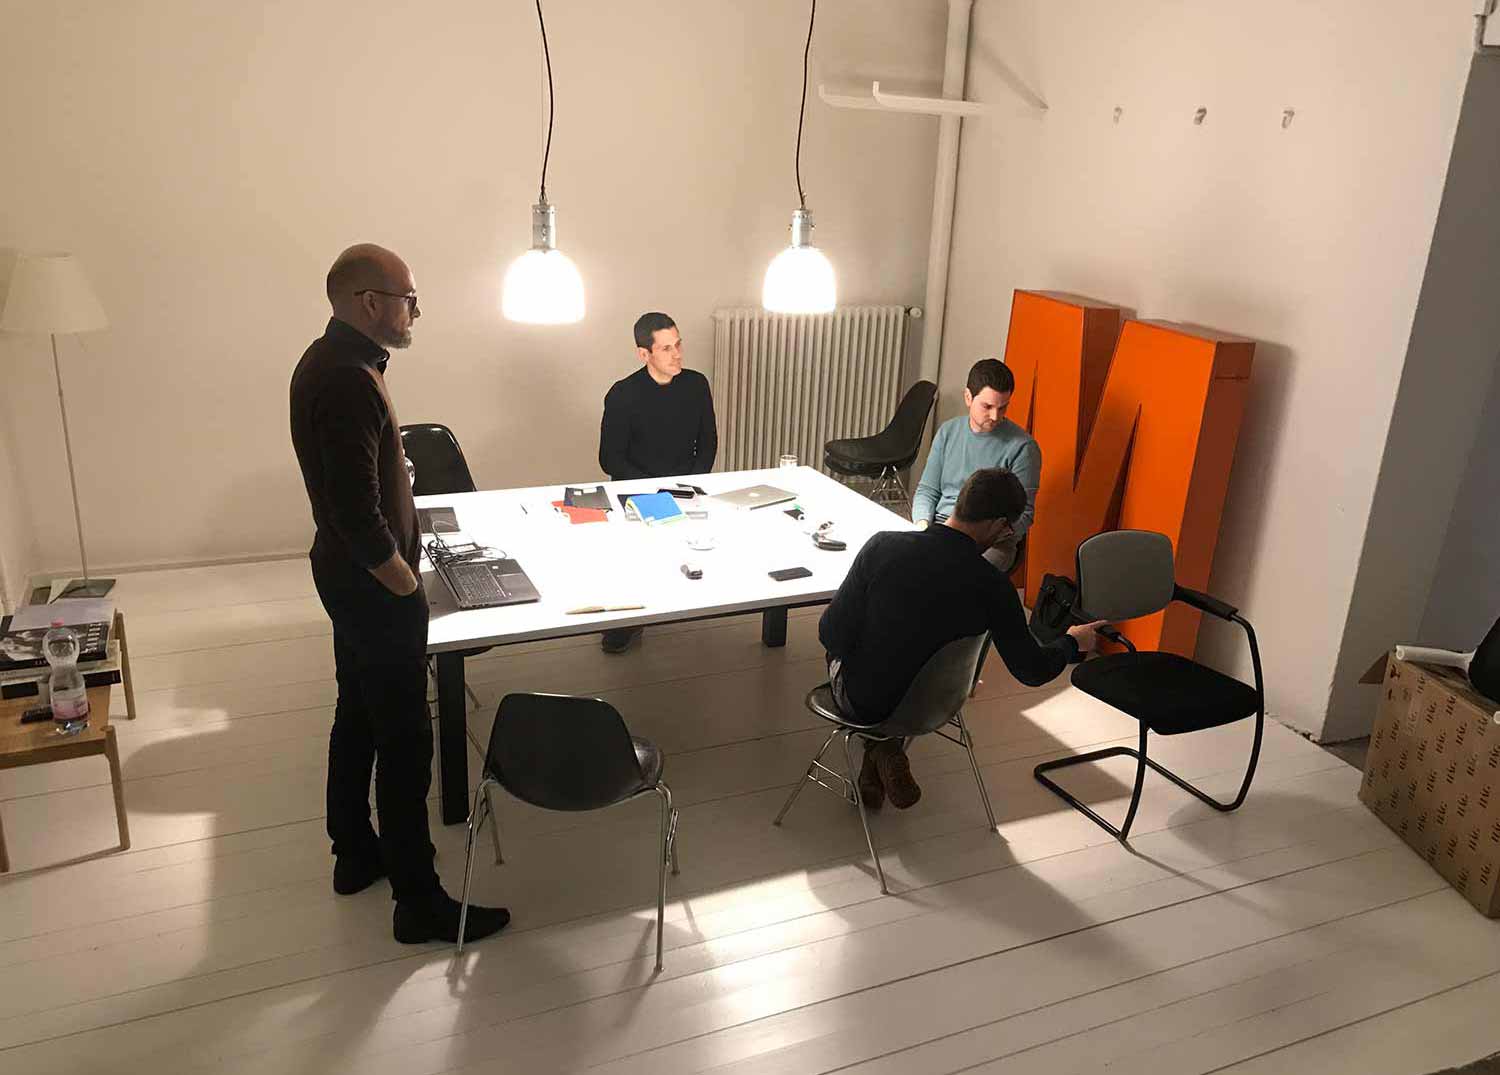 designewrs standing and sitting around a table with 2 pendant lights in a white room